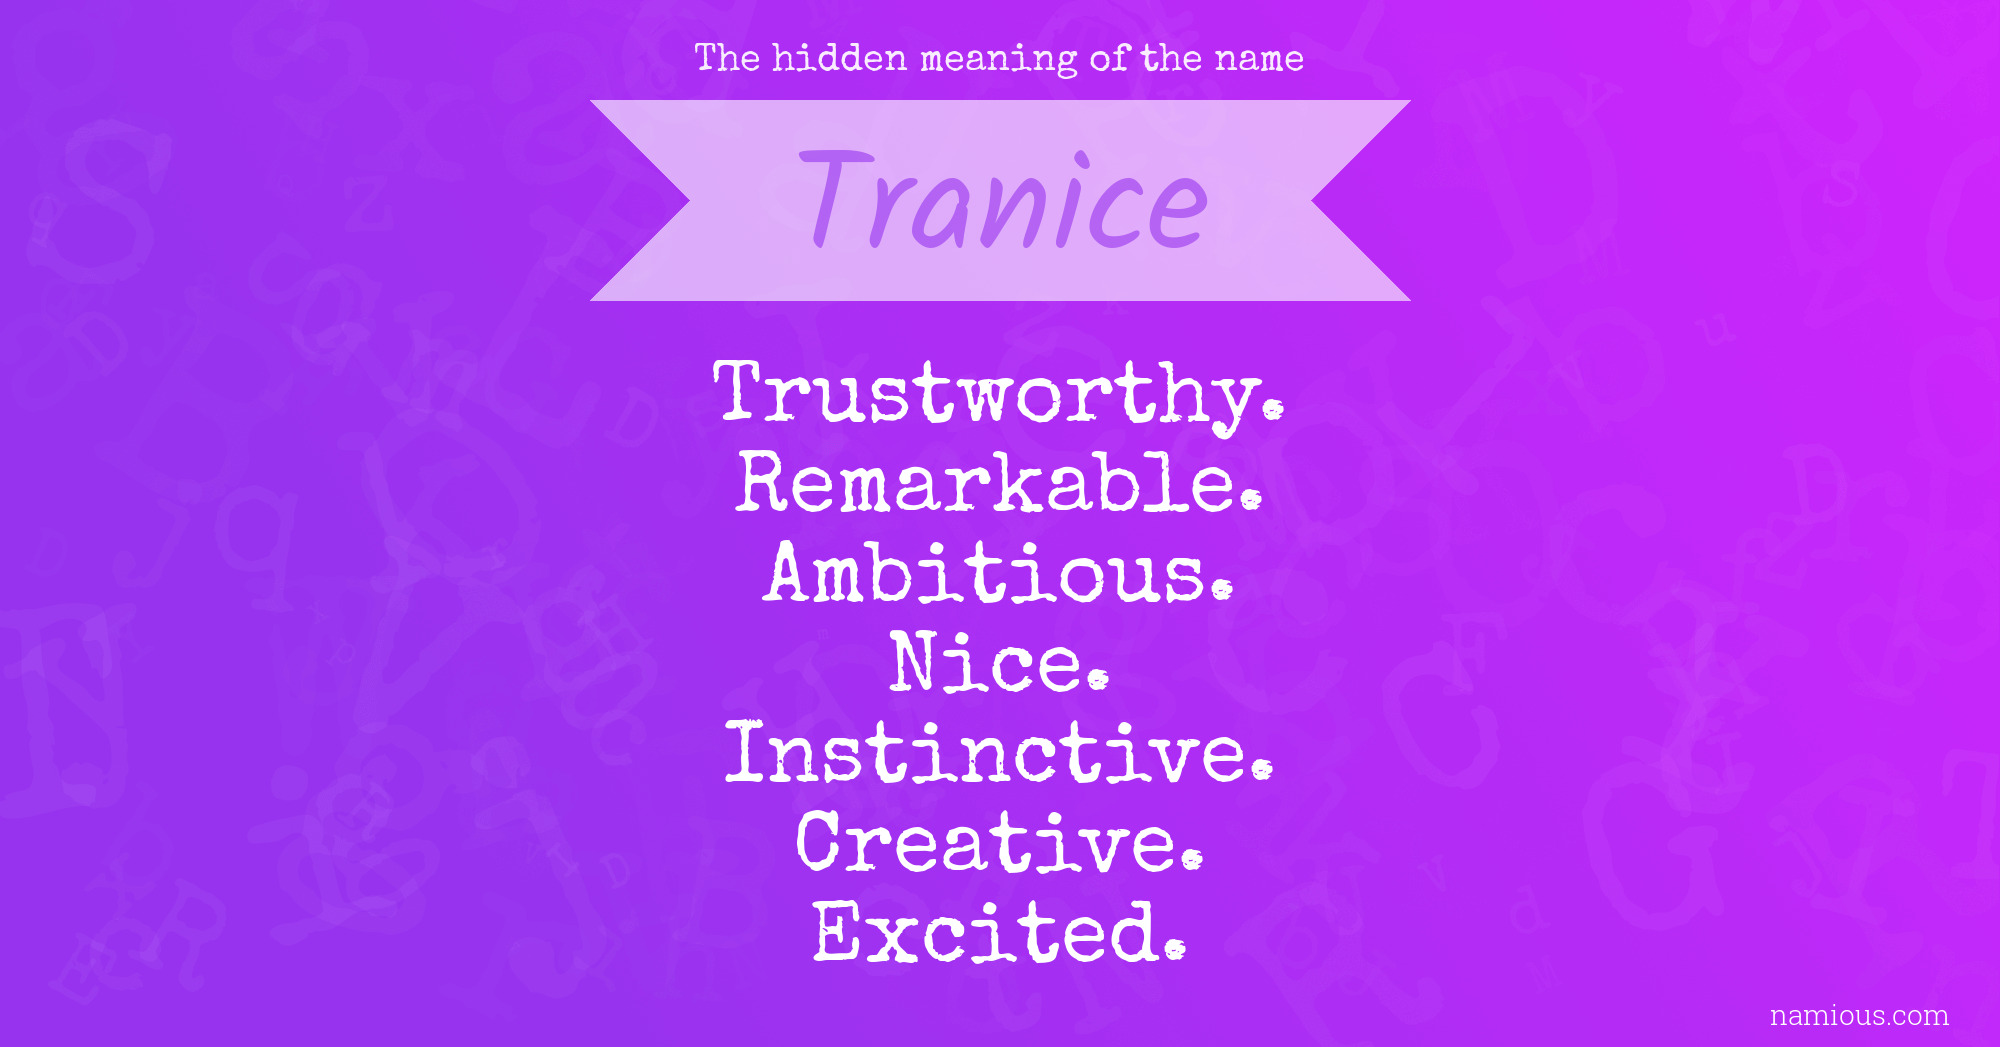 The hidden meaning of the name Tranice